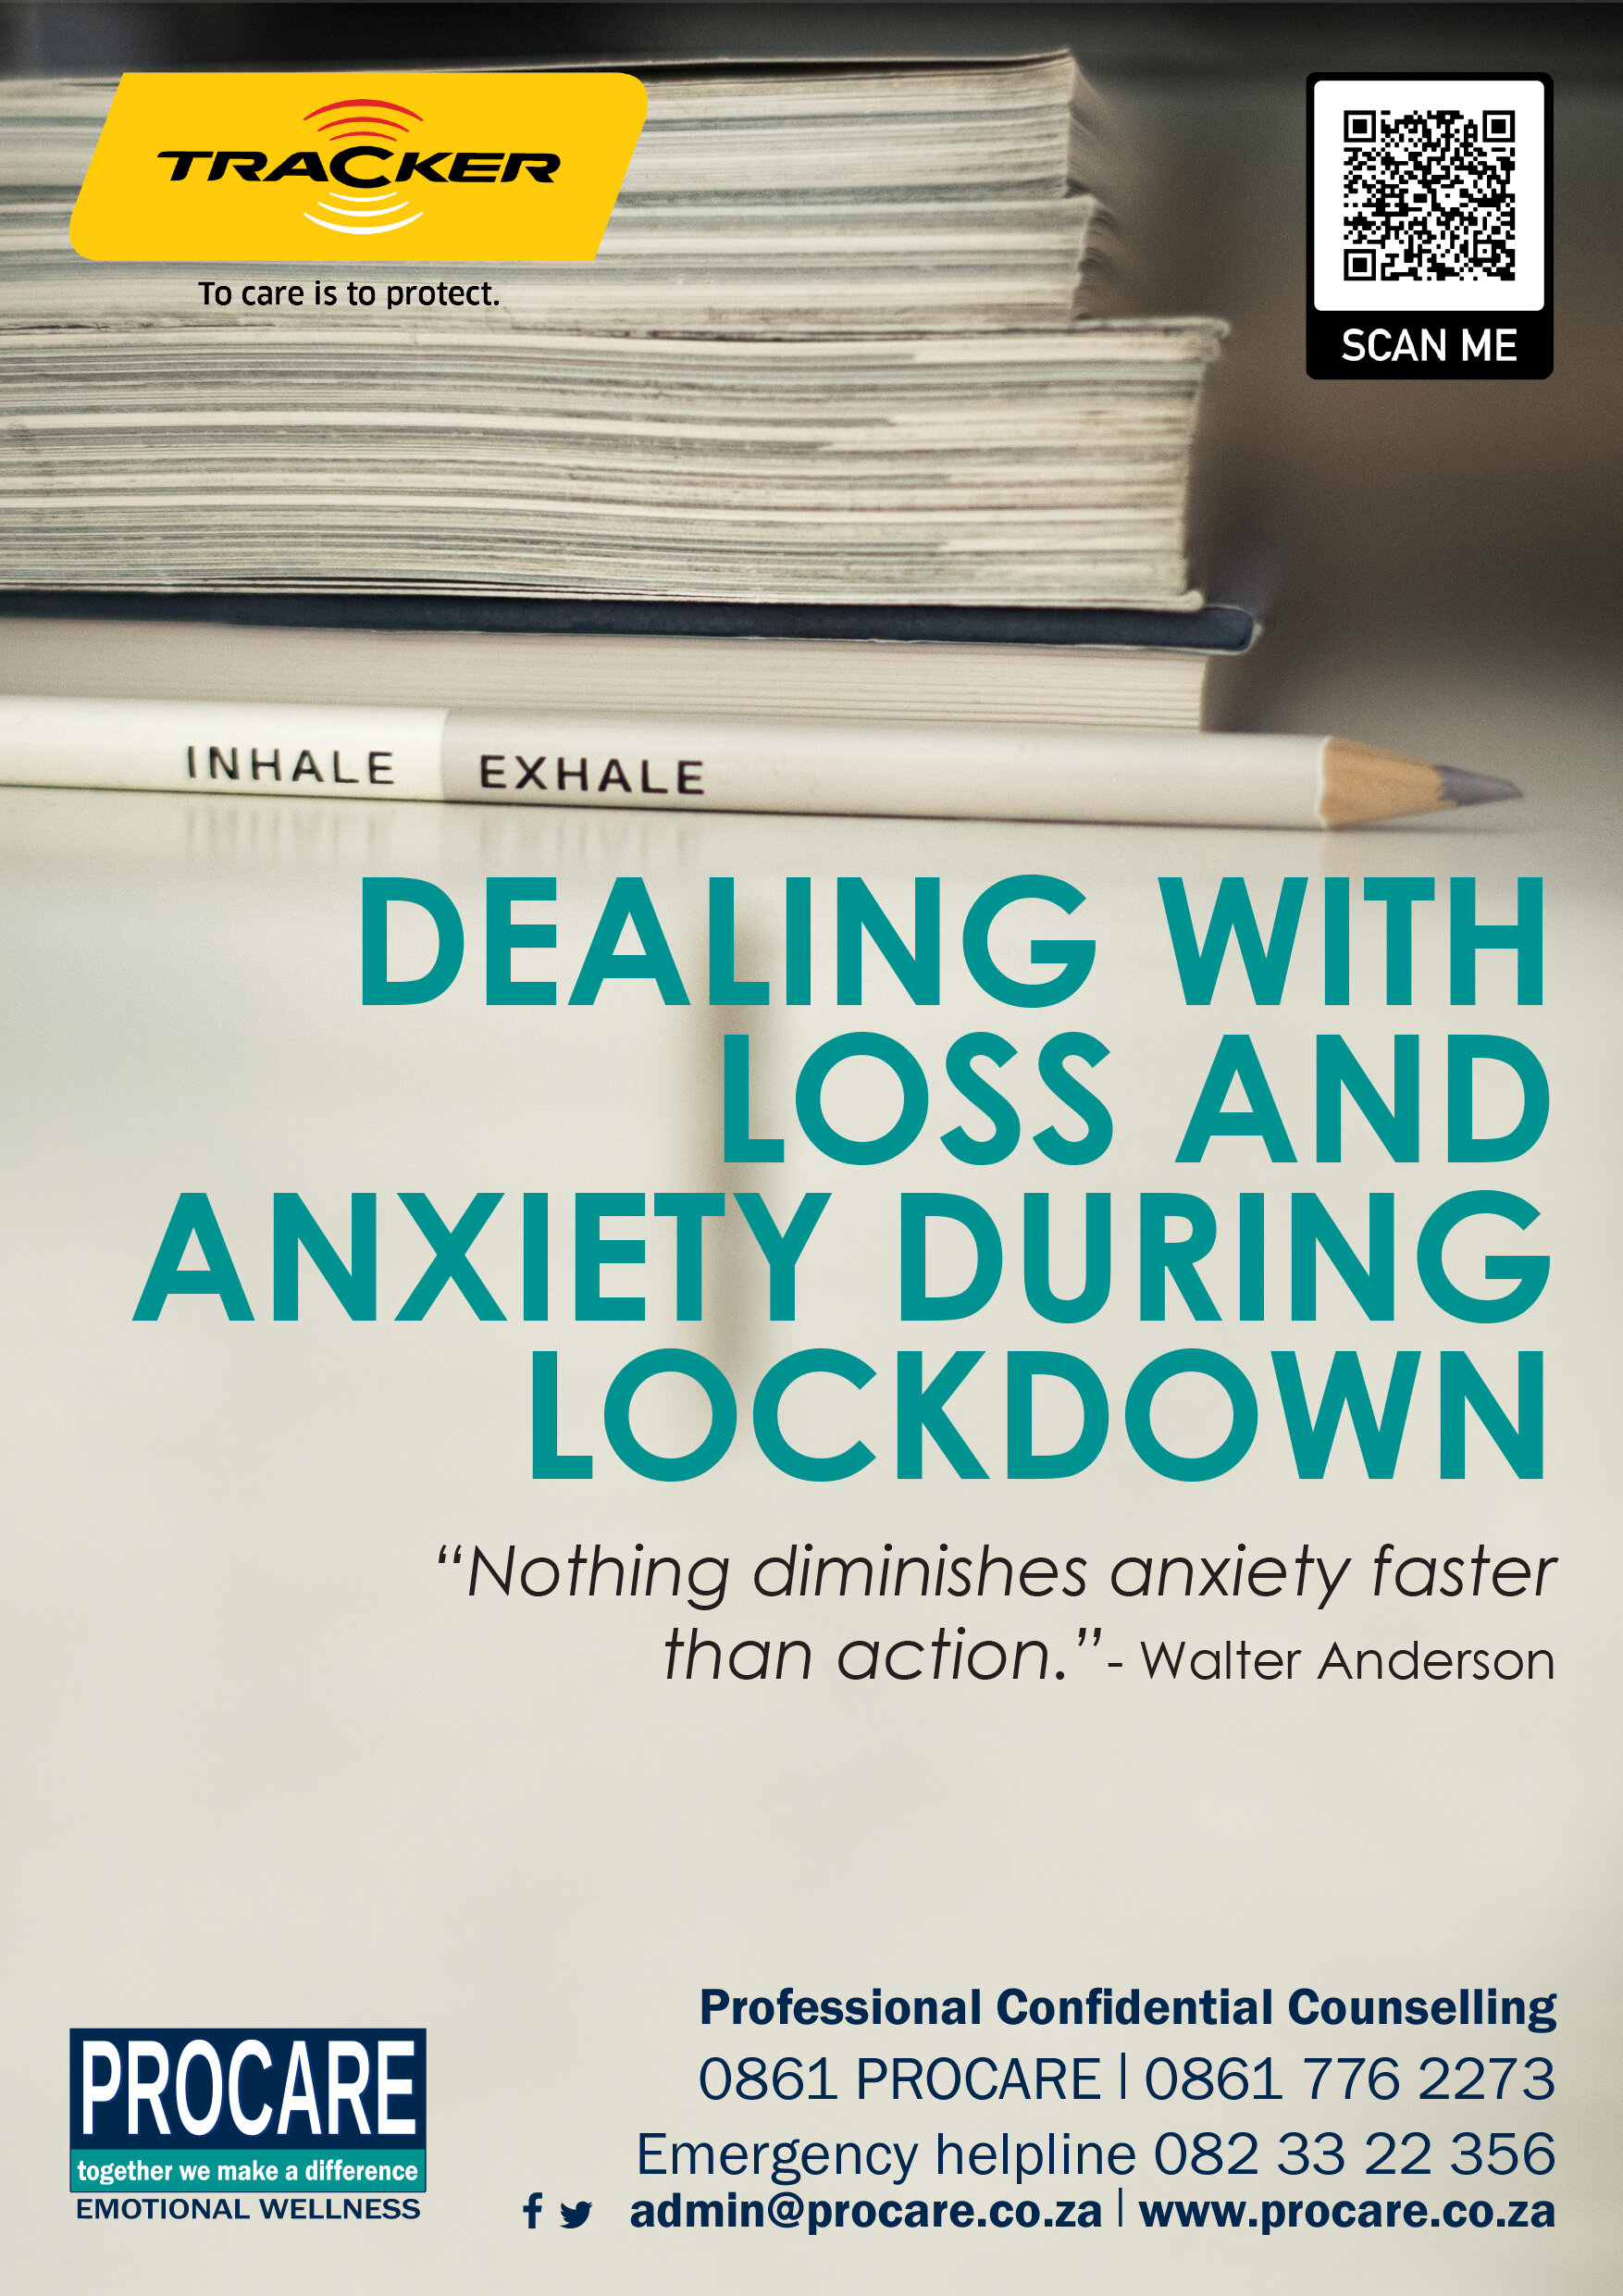 5 Easy-To-Do Exercises To Stay Strong During Lockdown! - PharmEasy